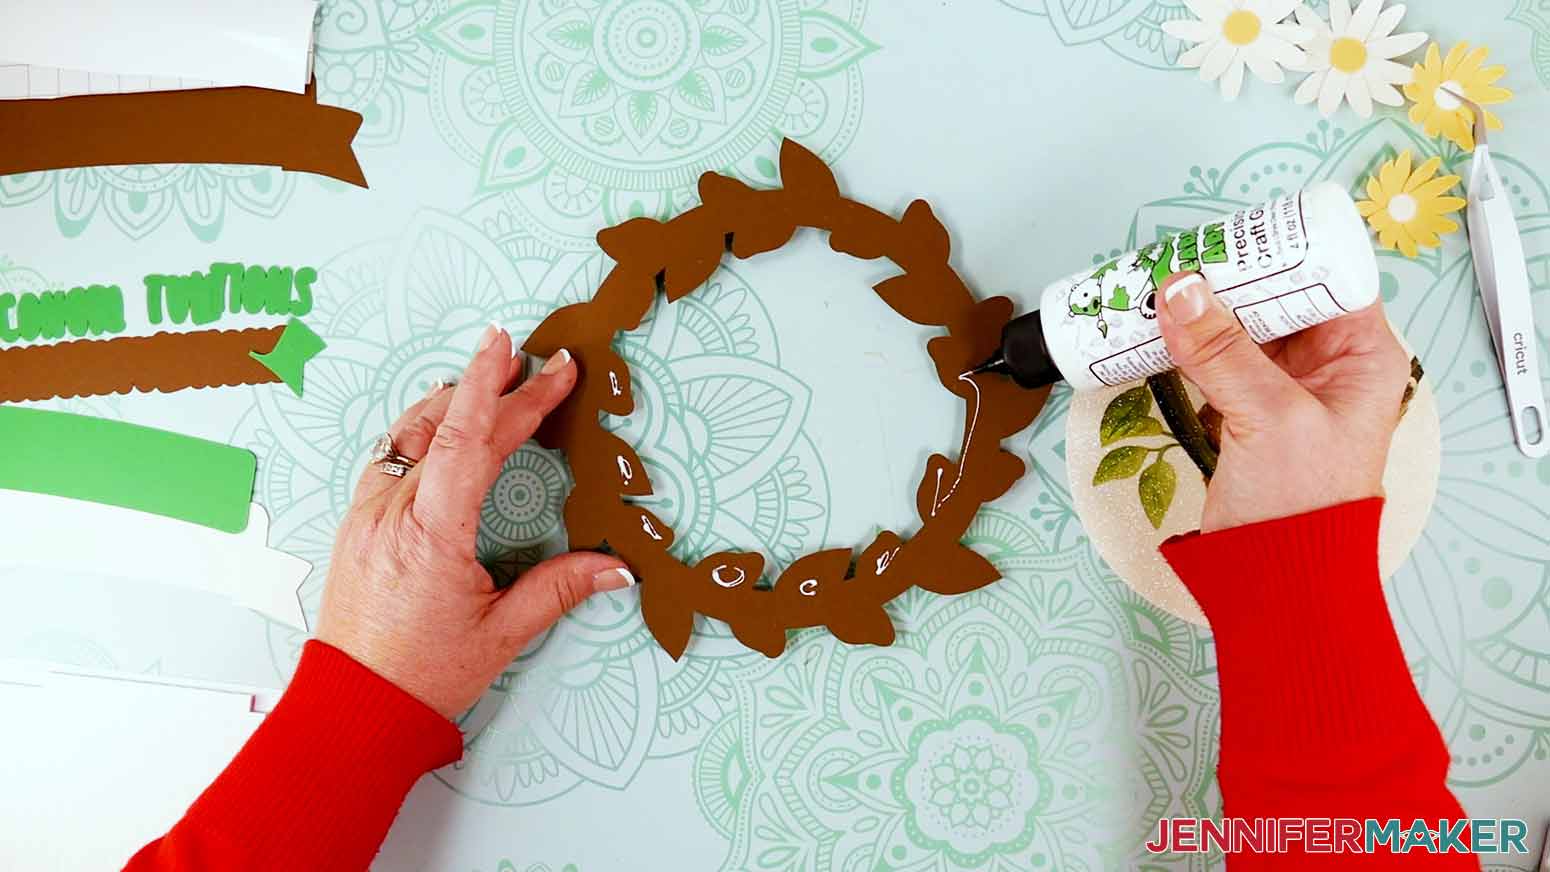 Apply craft glue to the back of the brown wreath layer around the inside circle area of the leaves.